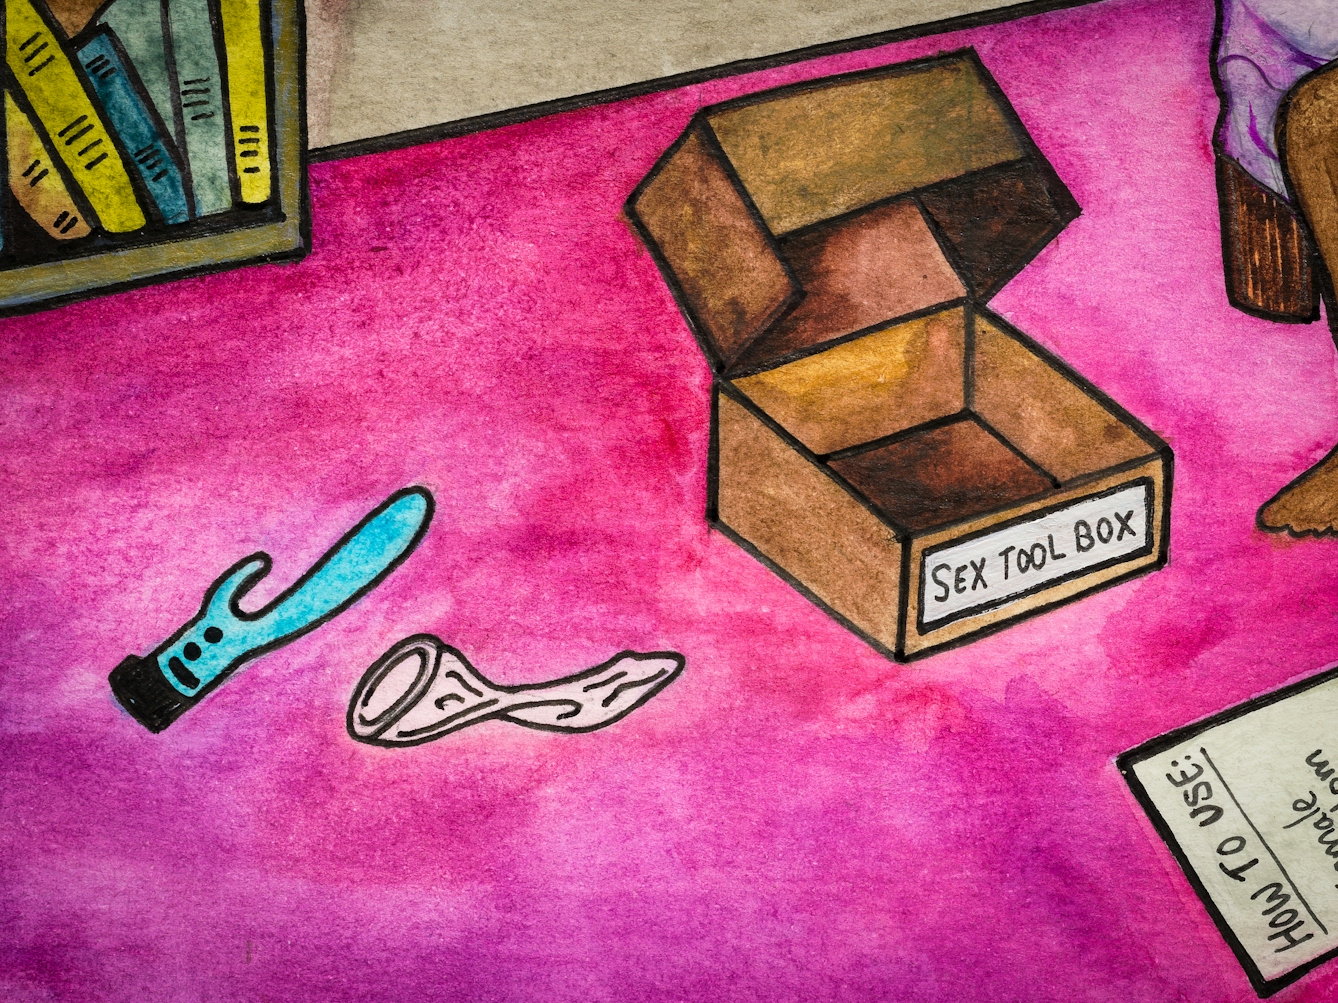 Detail from larger artwork made with paint and ink on textured watercolour paper. The artwork shows a scene in a bedroom with predominantly hues of pink, mauve and yellows. On the floor is an open brown box, with the words 'Sex tool box' written on the side. Scattered around the box is a blue dildo a female condom and set of instructions titled, 'How to use:'.